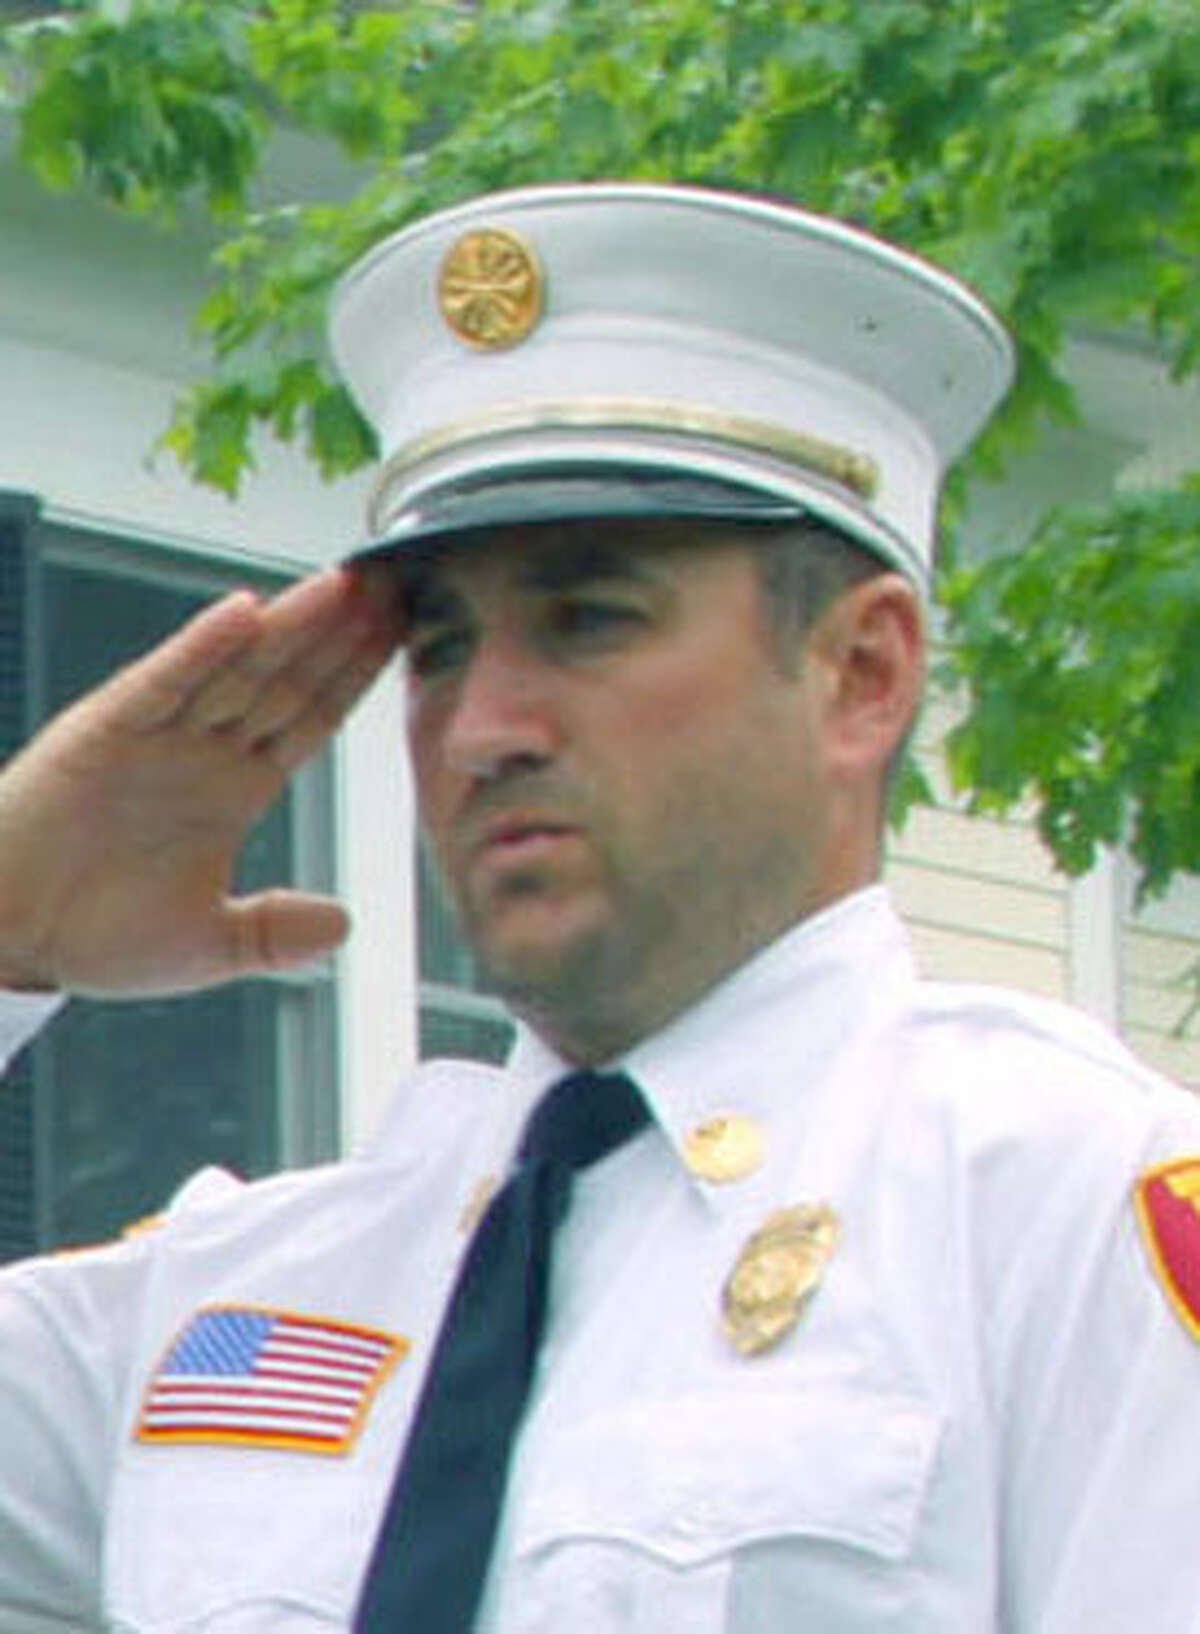 Former Bridgewater Volunteer Fire Department Chief Justin Planz in the May 2012 file photo.